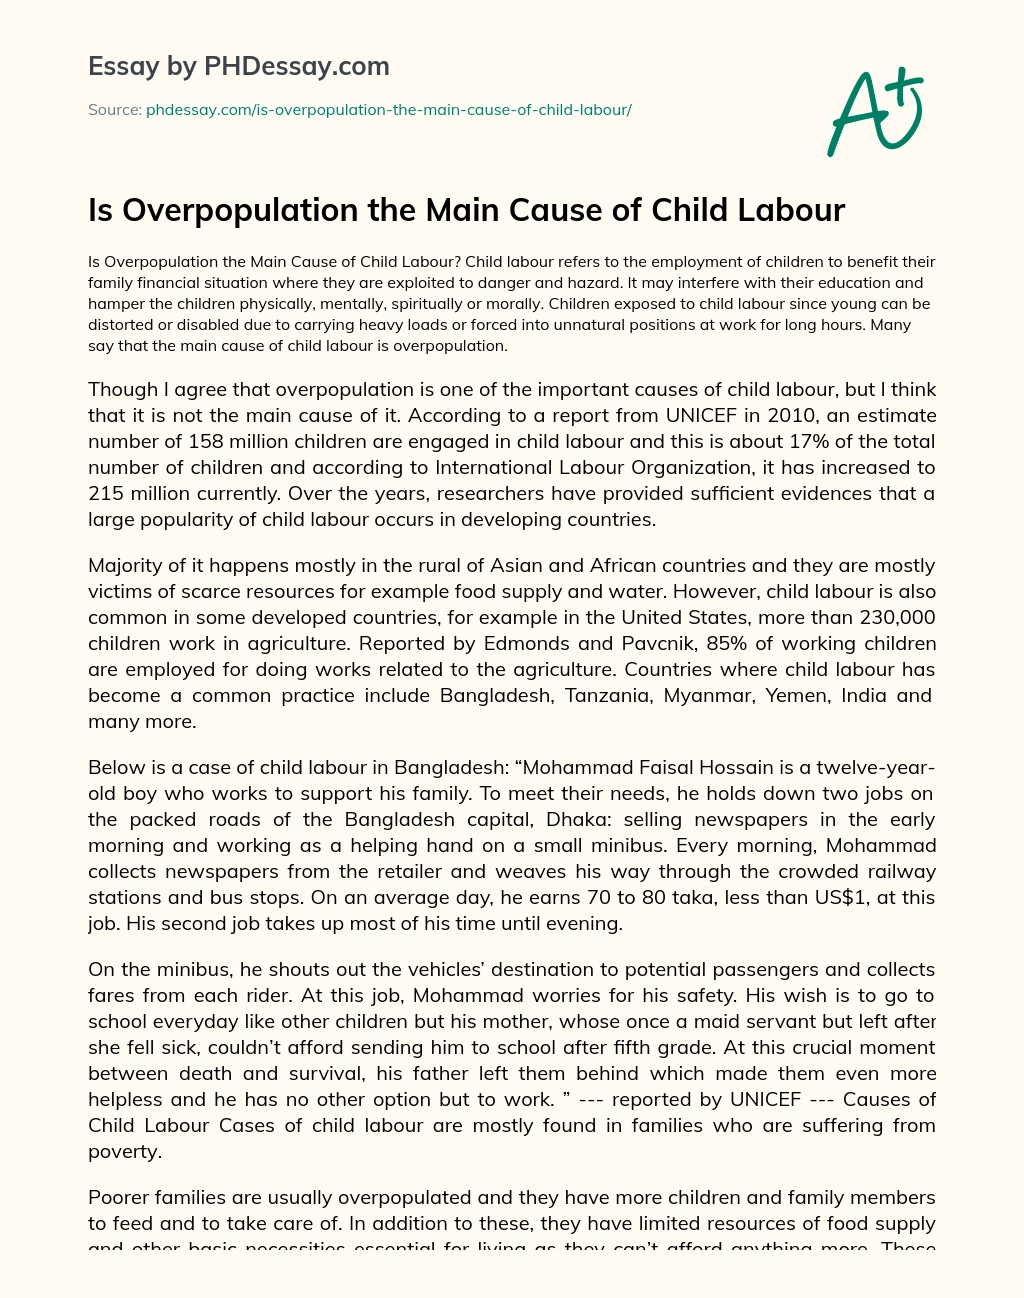 Is Overpopulation the Main Cause of Child Labour essay